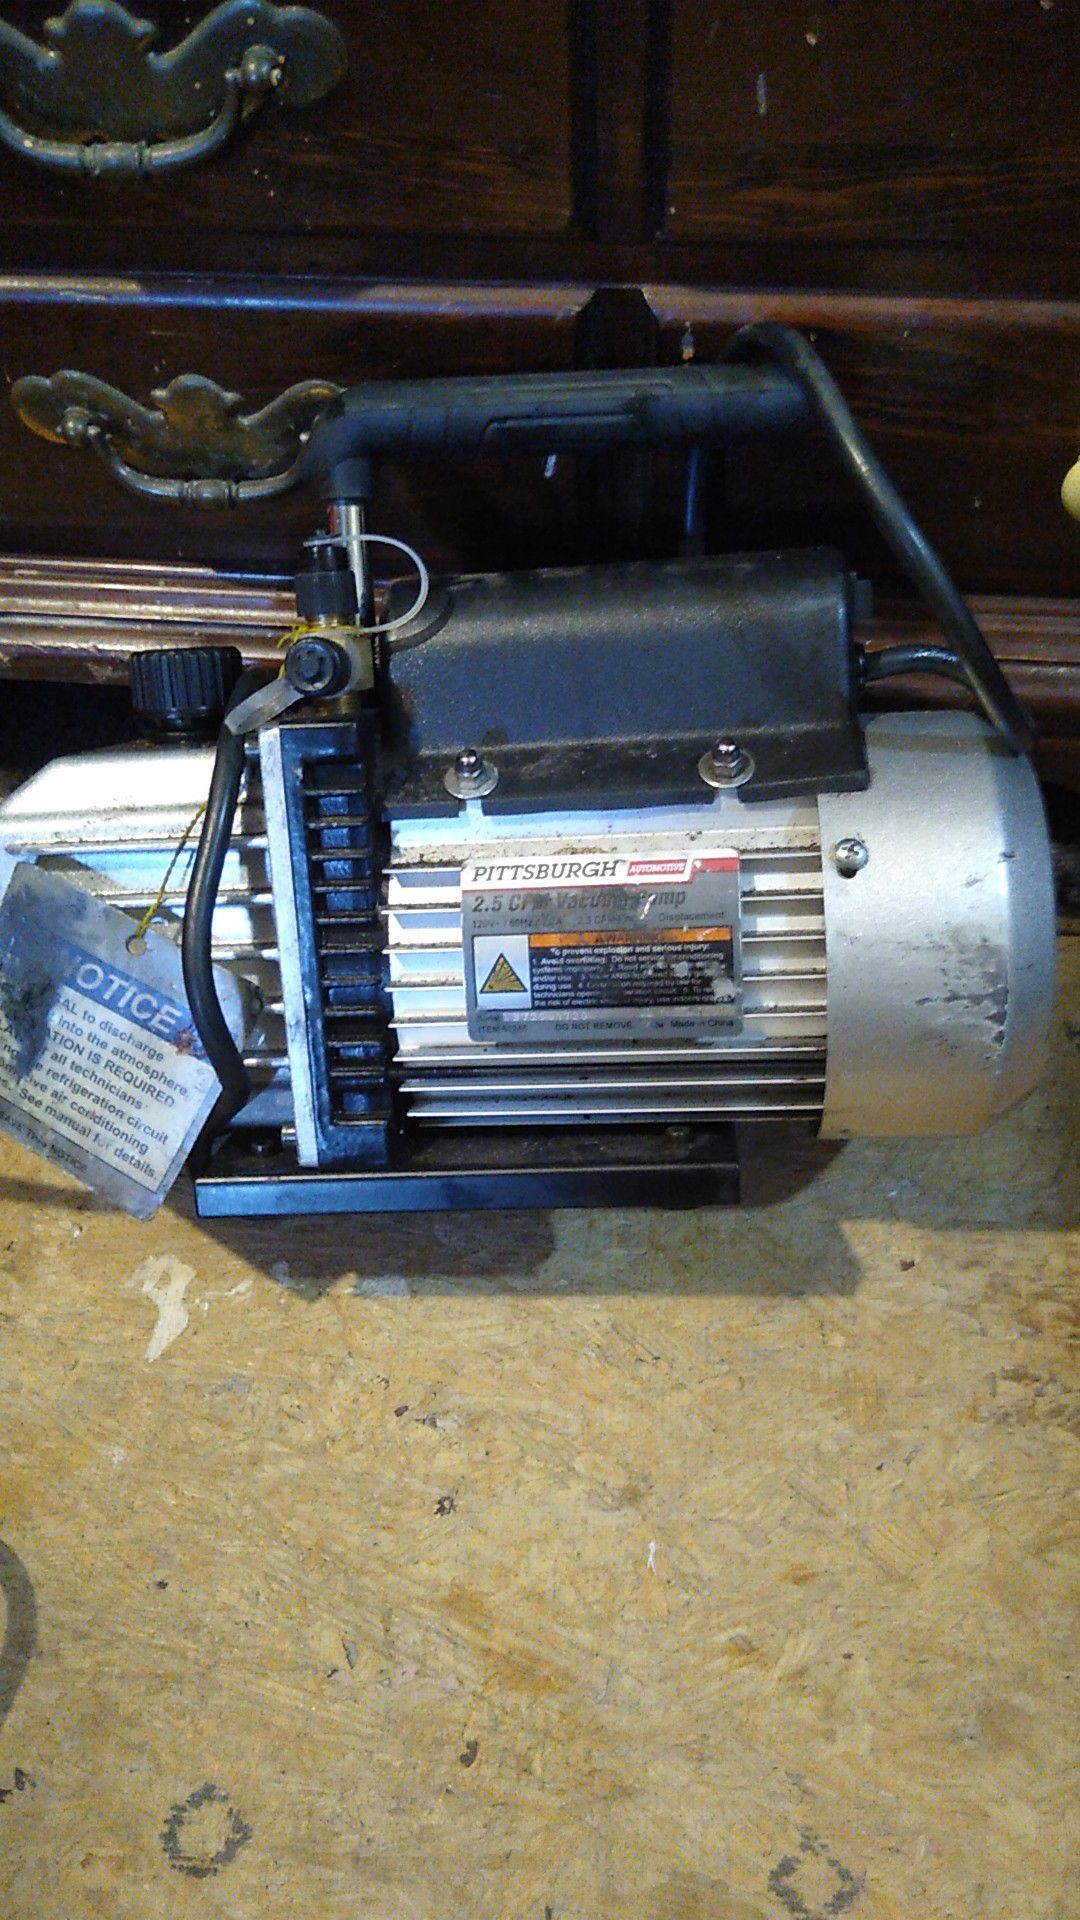 Pittsburgh 2.5 vacuum pump for AC units it will pump any kind of freon in or out